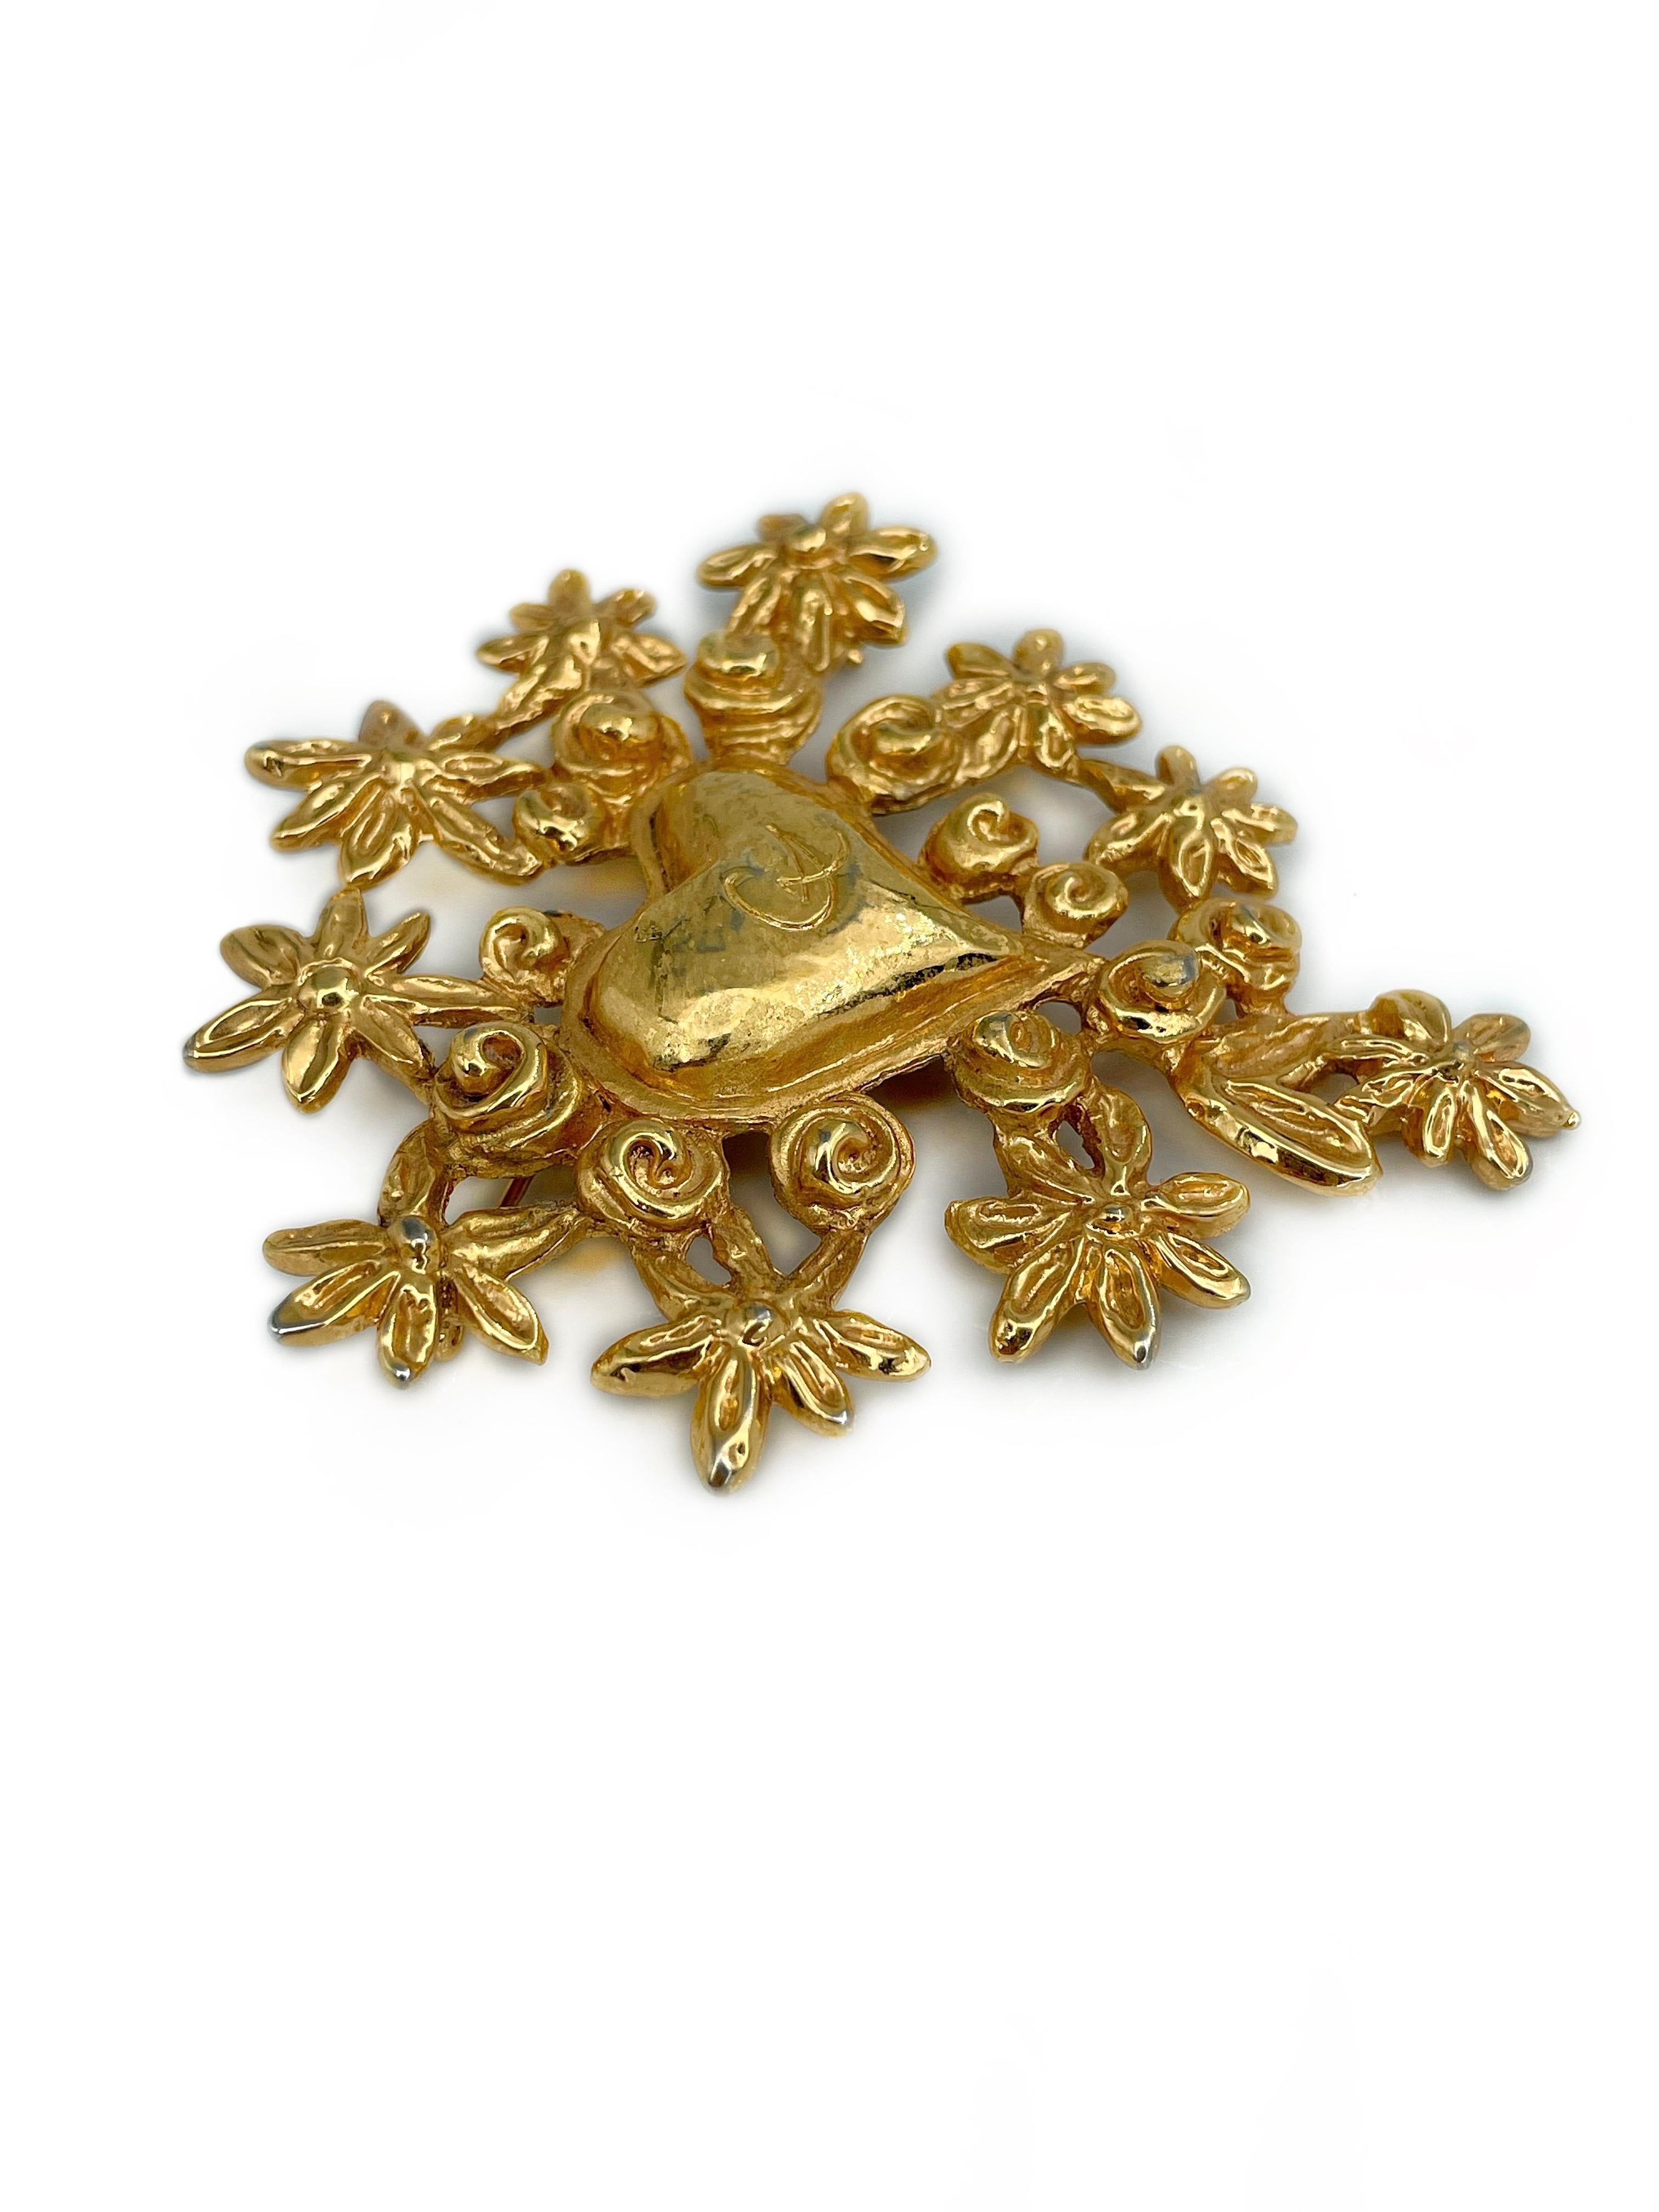 This is an amazing gold tone CL logo heart flower brooch designed by Christian Lacroix in 1993. The piece is gold plated. 

Limited limited edition. Produced specially for the Christmas season.

Signed: “Christian Lacroix - CL - Made in France. Noel